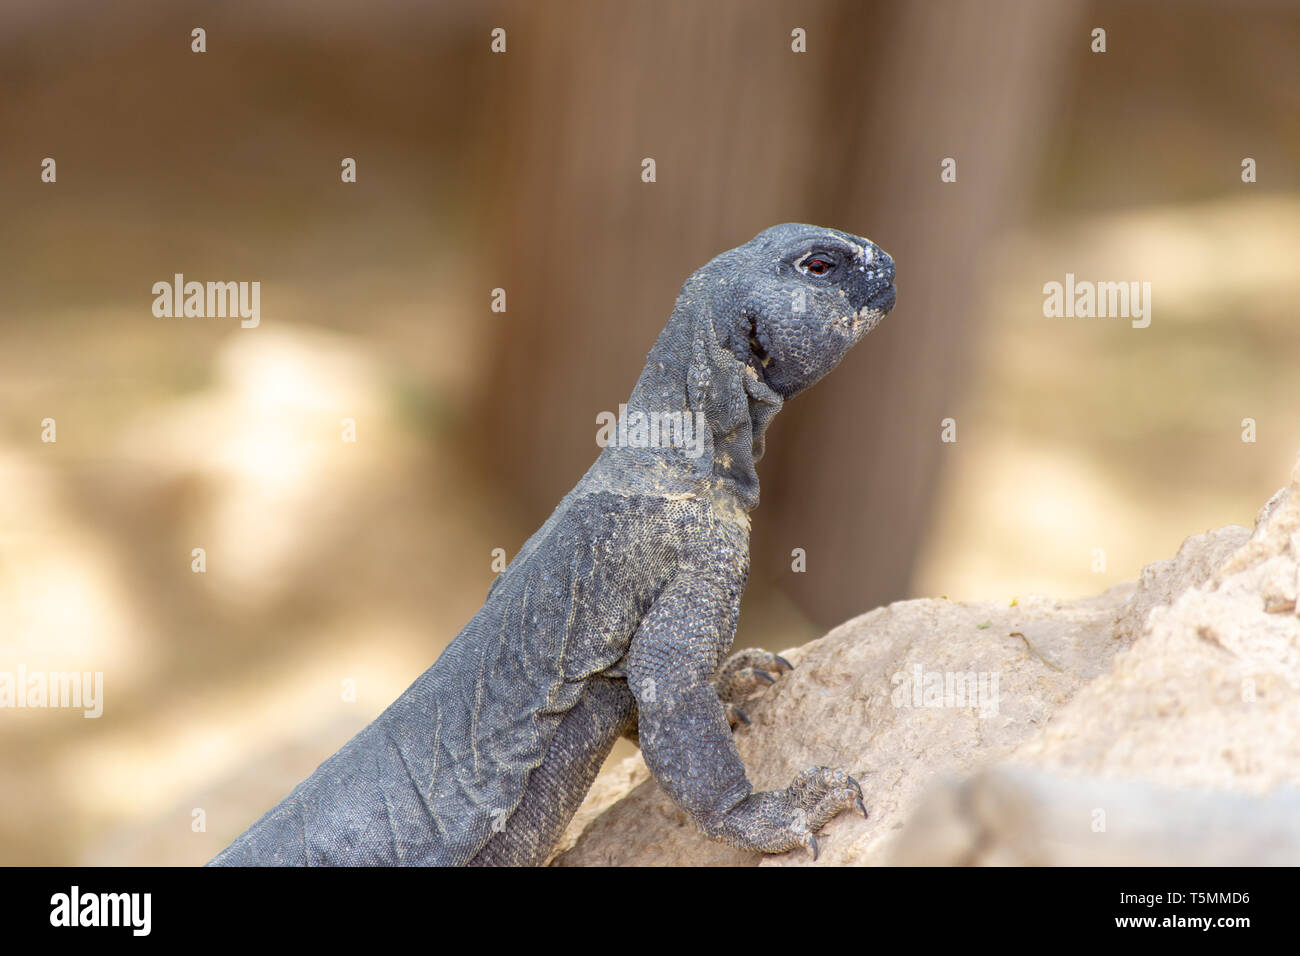 A close up of the head of a green Leiptien's Spiny Tailed Lizard resting on a rock looking around for its next move (Uromastyx aegyptia leptieni). Stock Photo